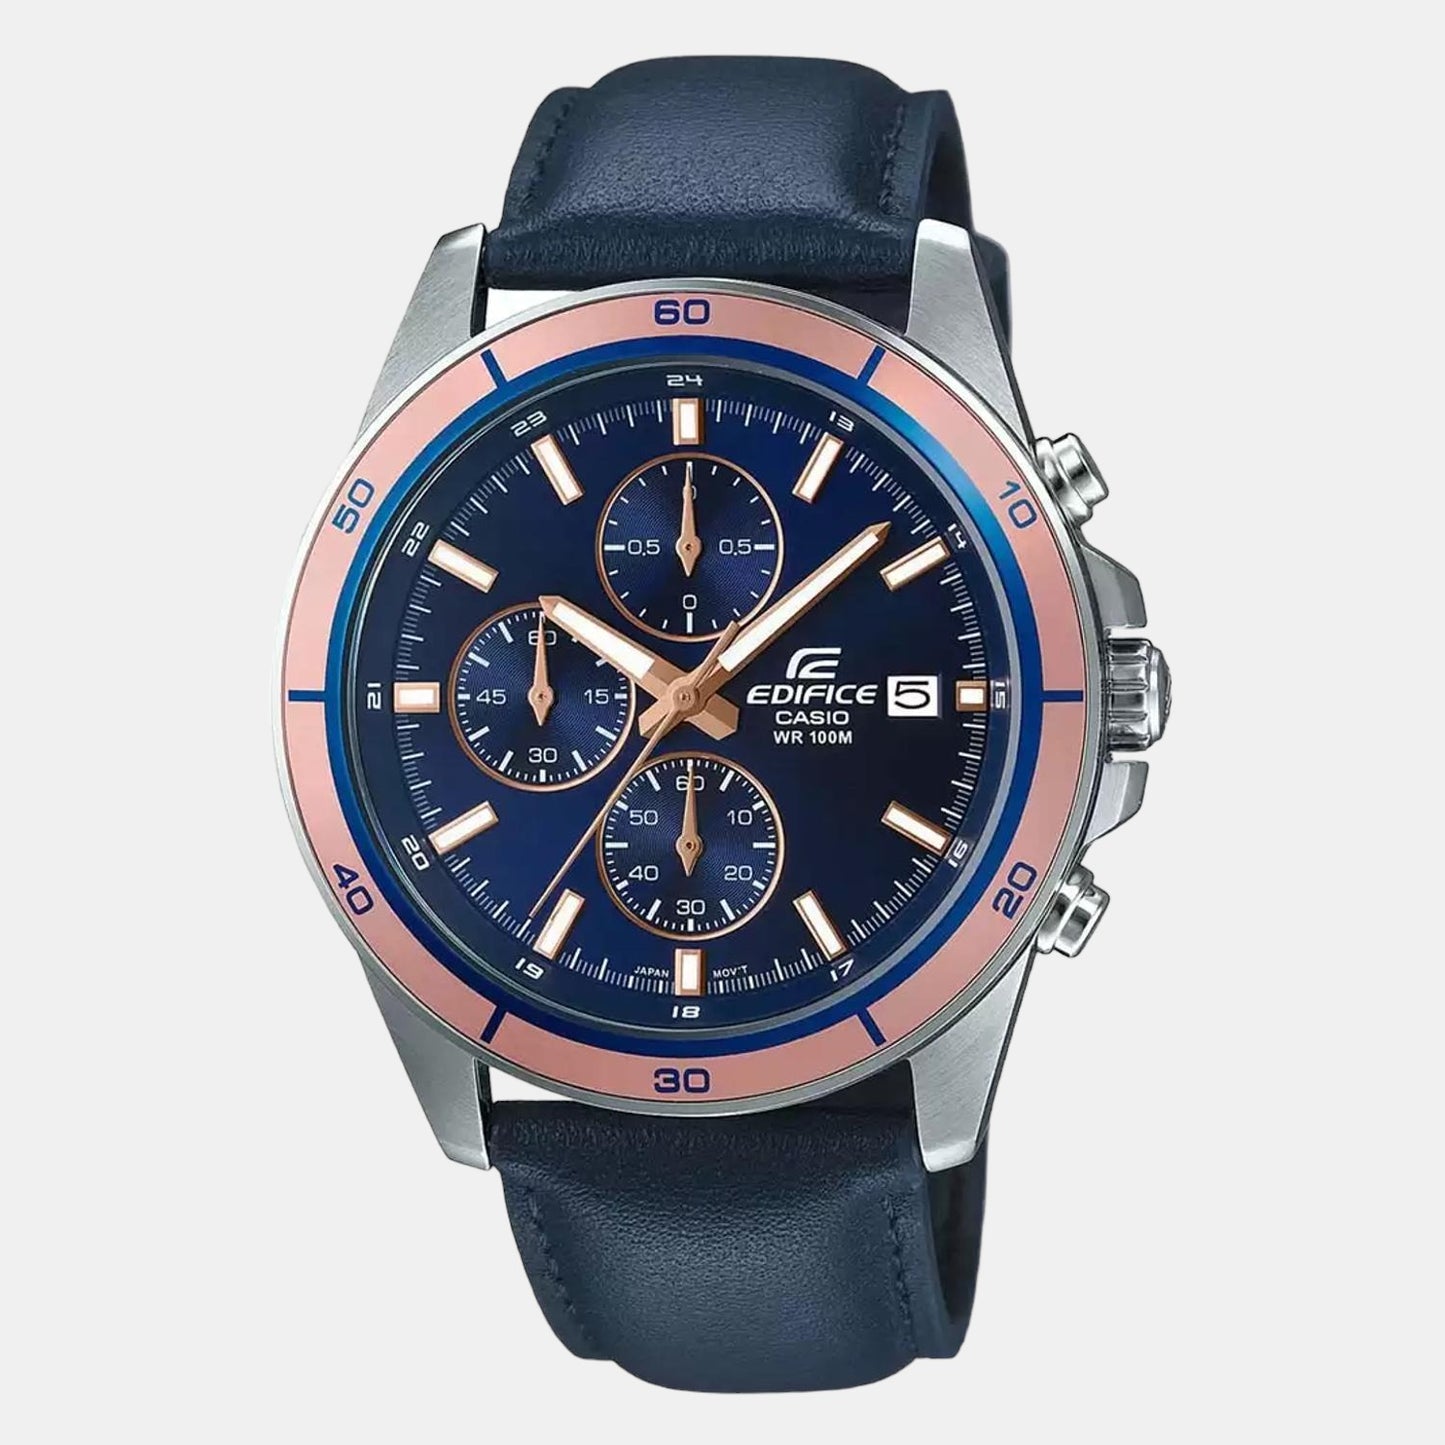 Edifice Male Leather Chronograph Watch EX302